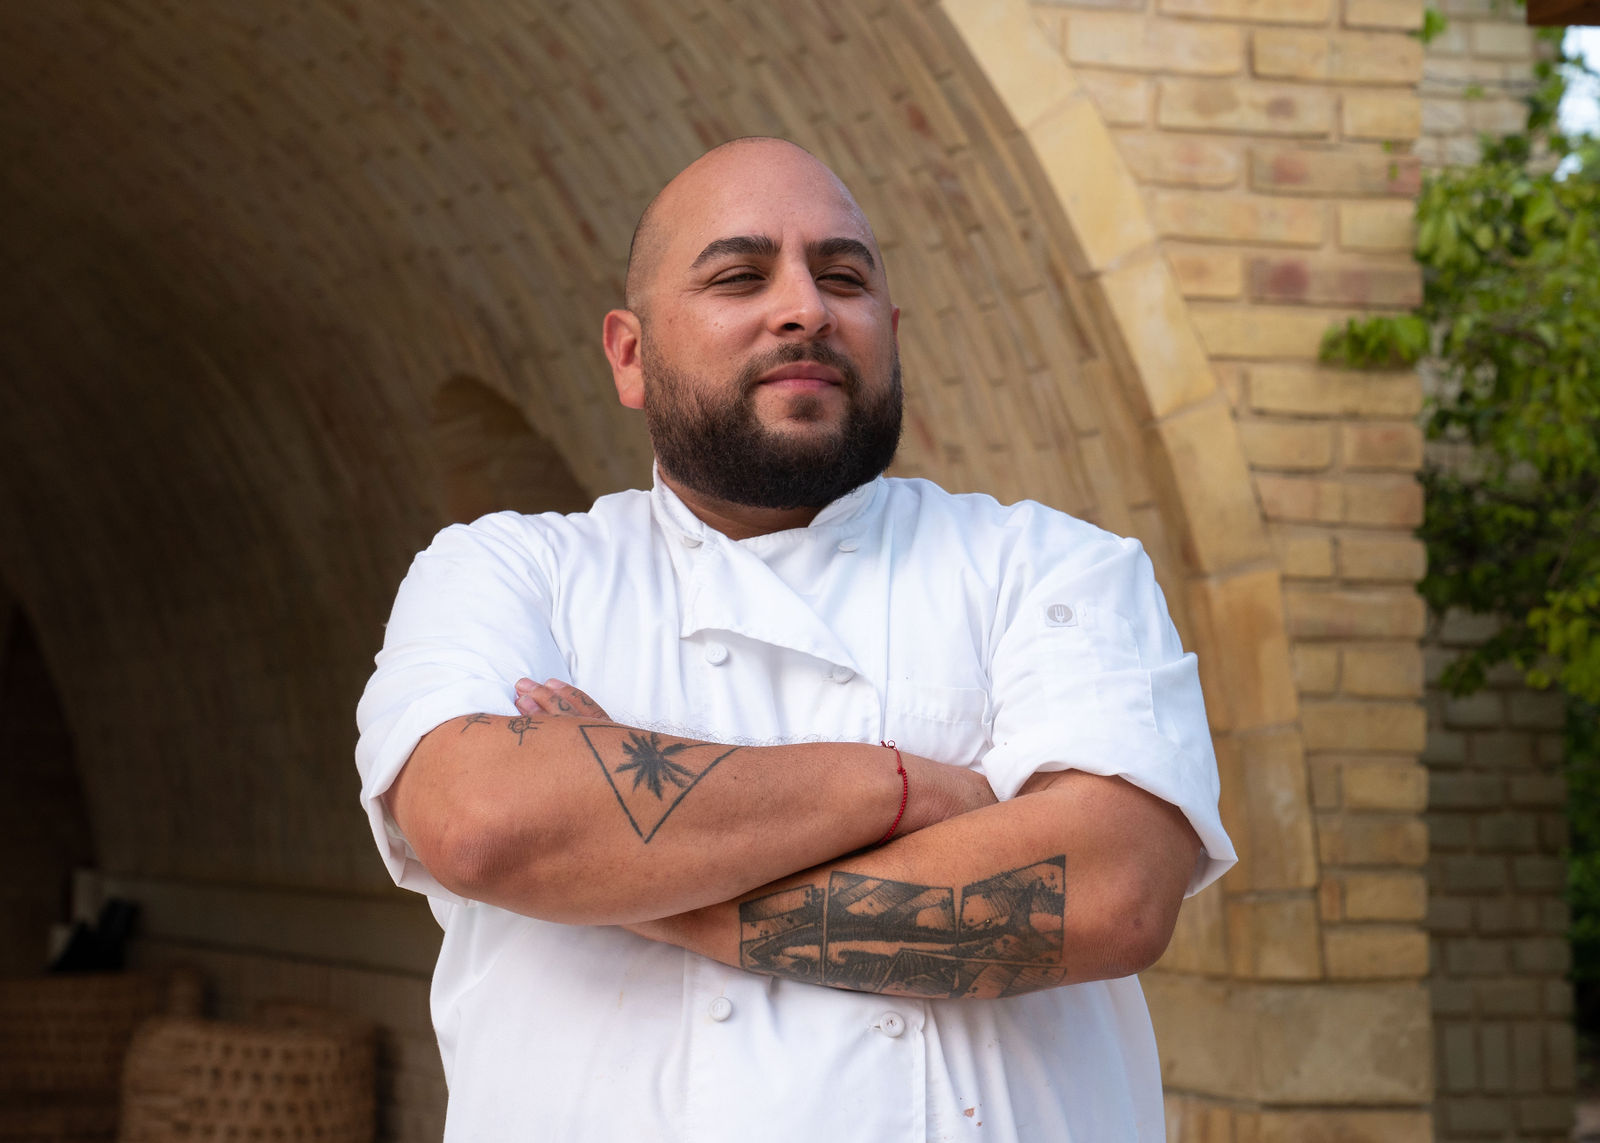 A chef stands with his arms crossed.